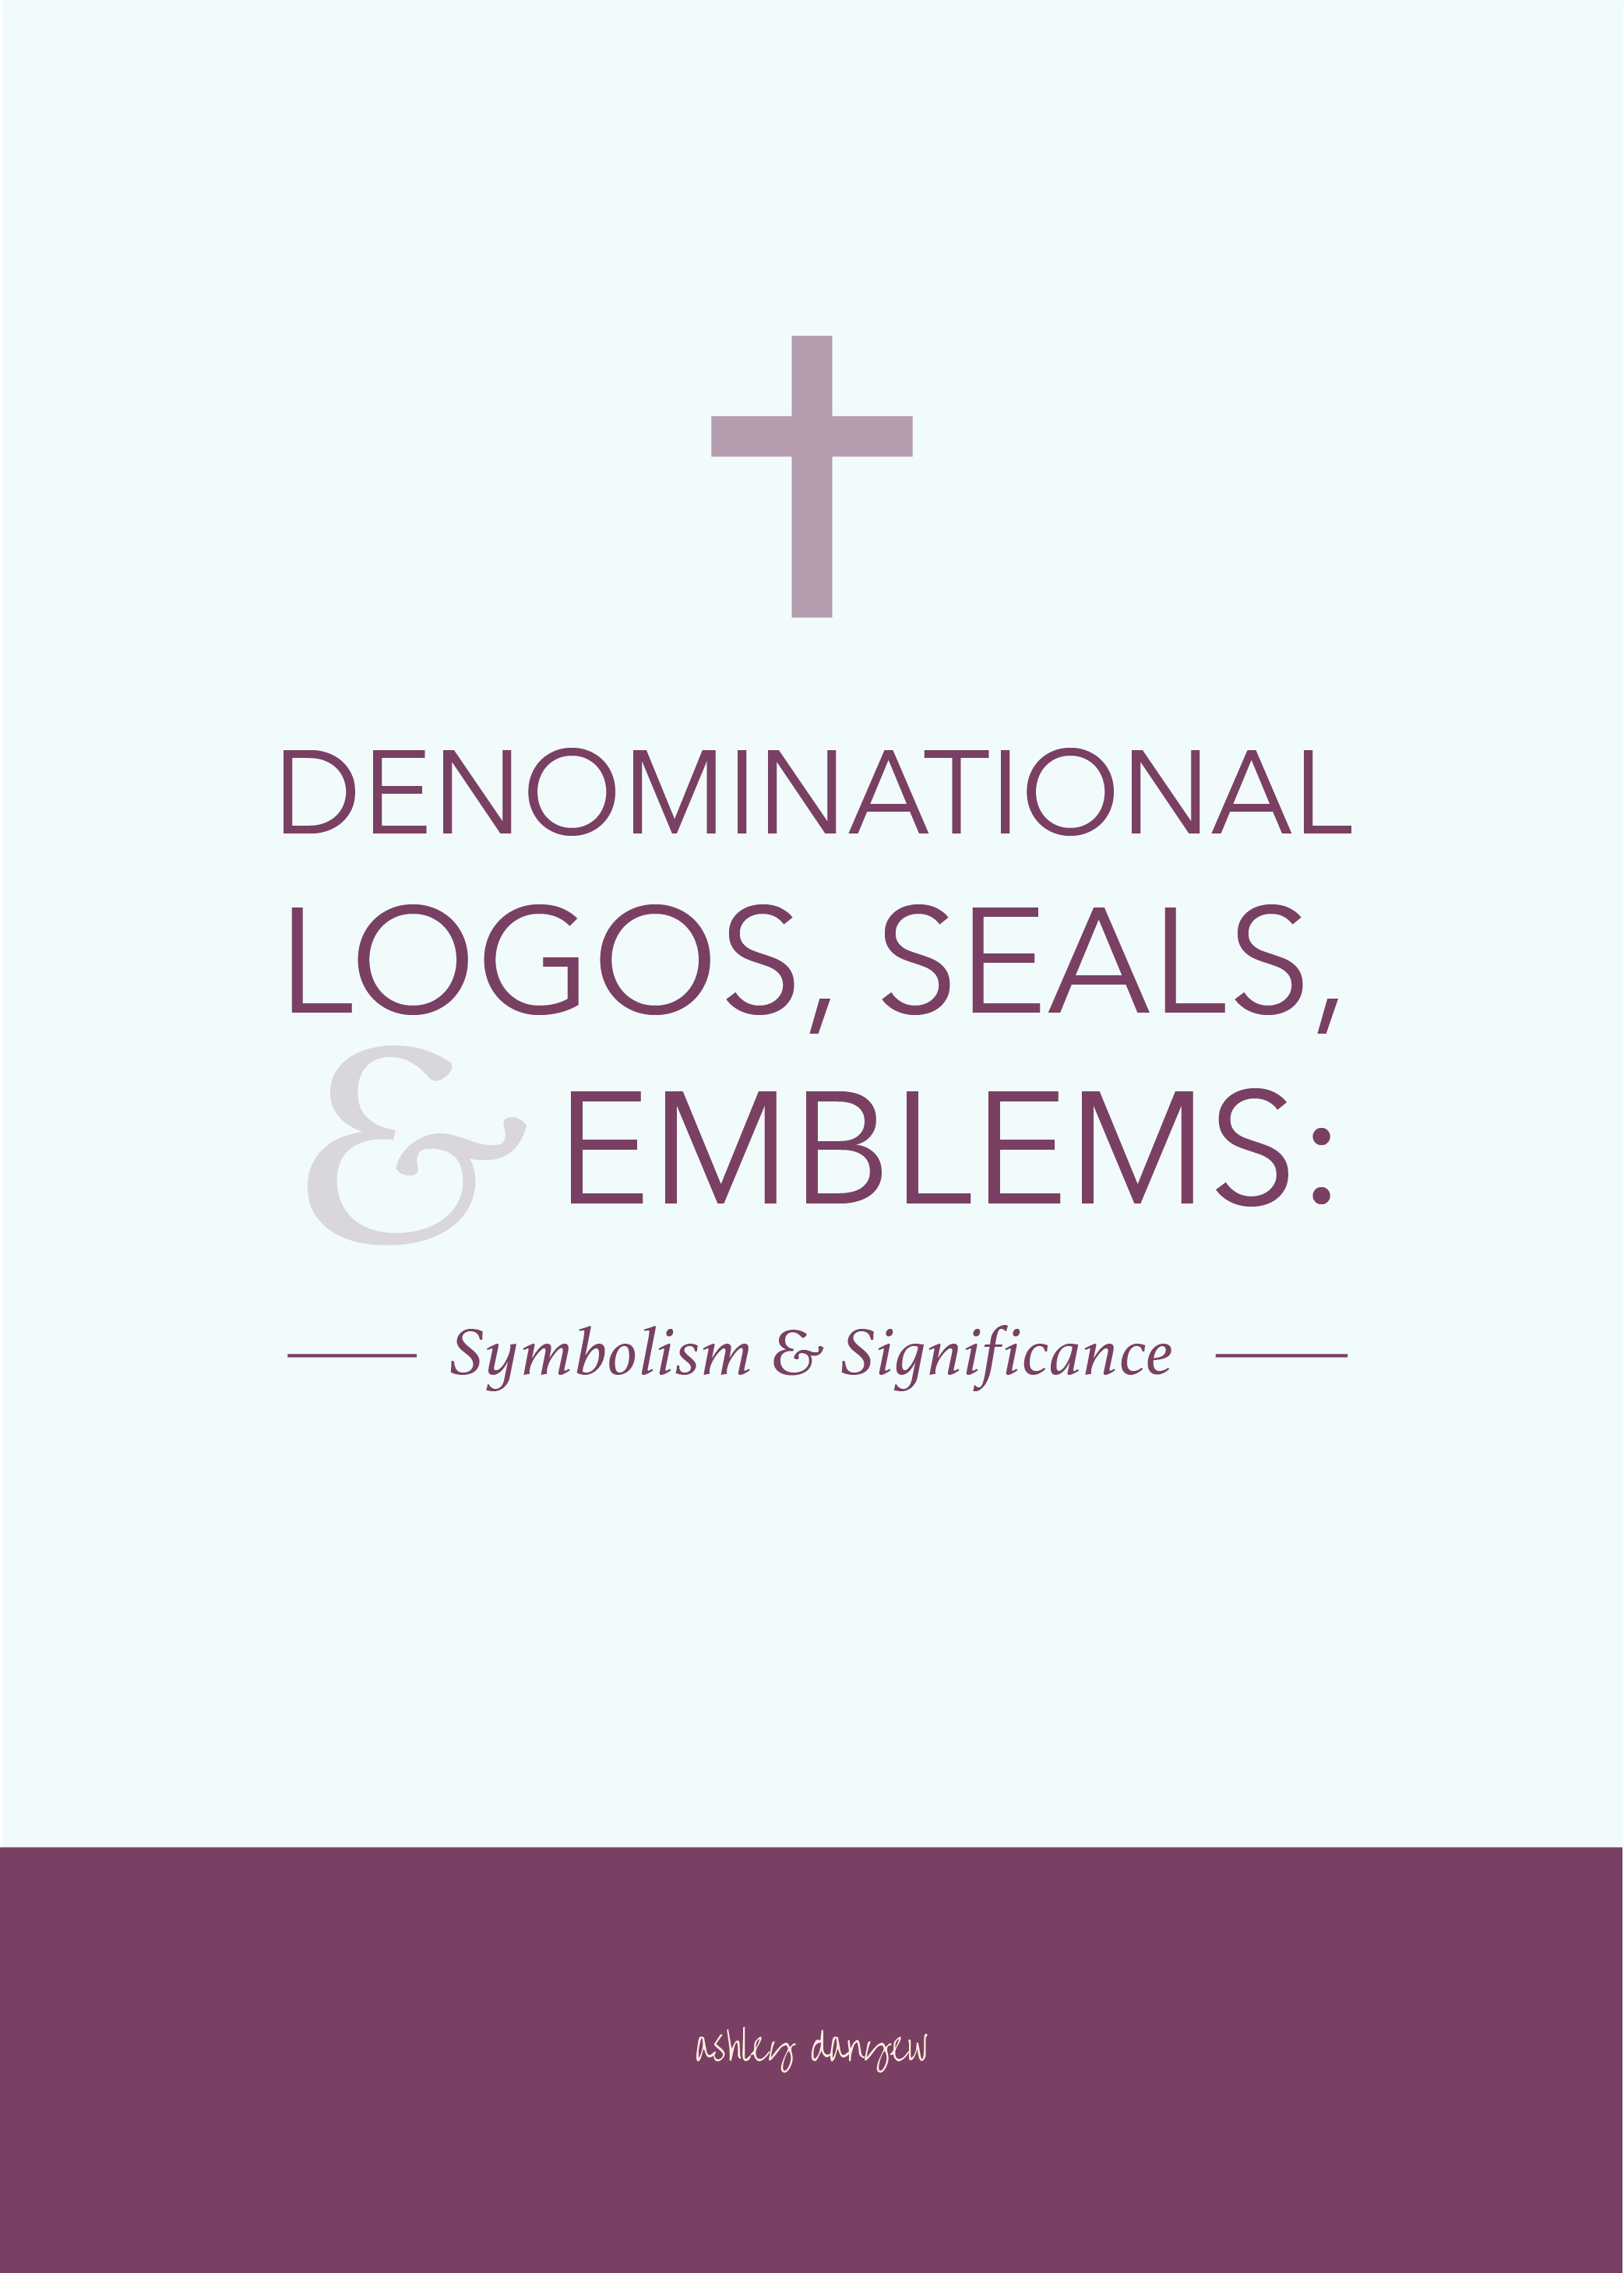 Copy of Denominational Logos, Seals, and Emblems - Symbolism and Significance